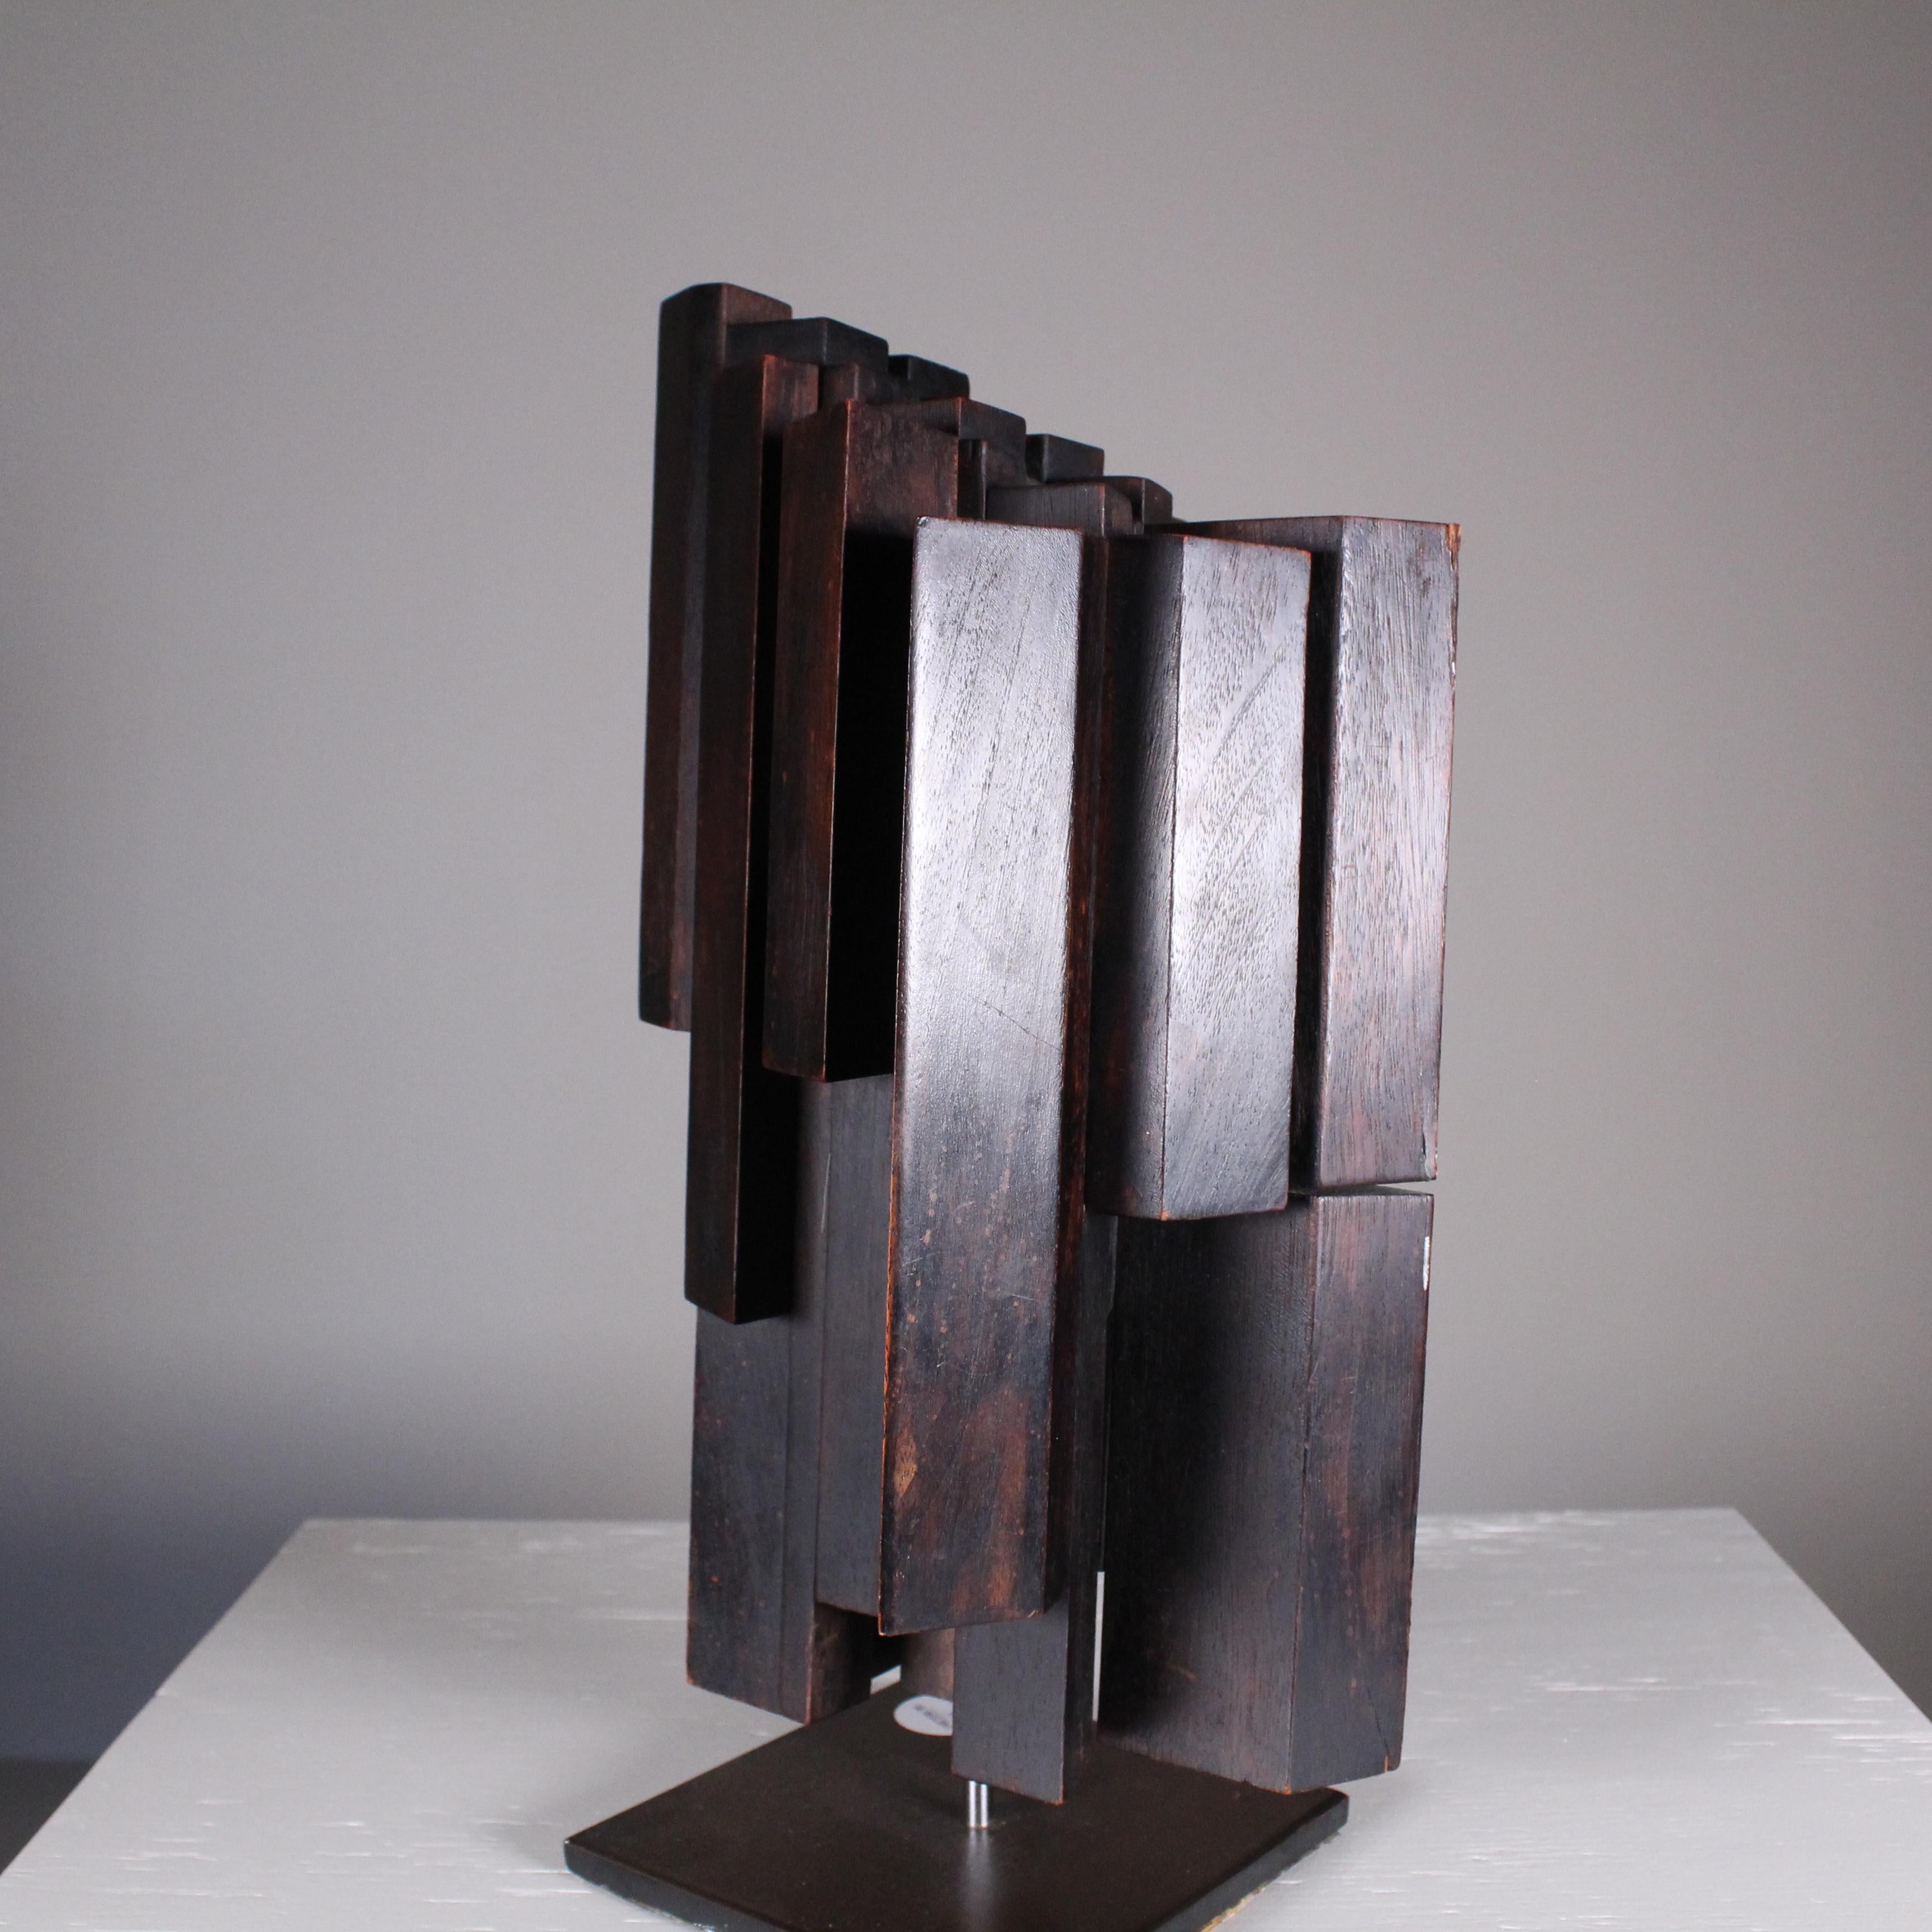 Sculpture made of black painted wood and metal pedestal. Good overall condition, howeverap resents swgni of wear and tear due to time. 